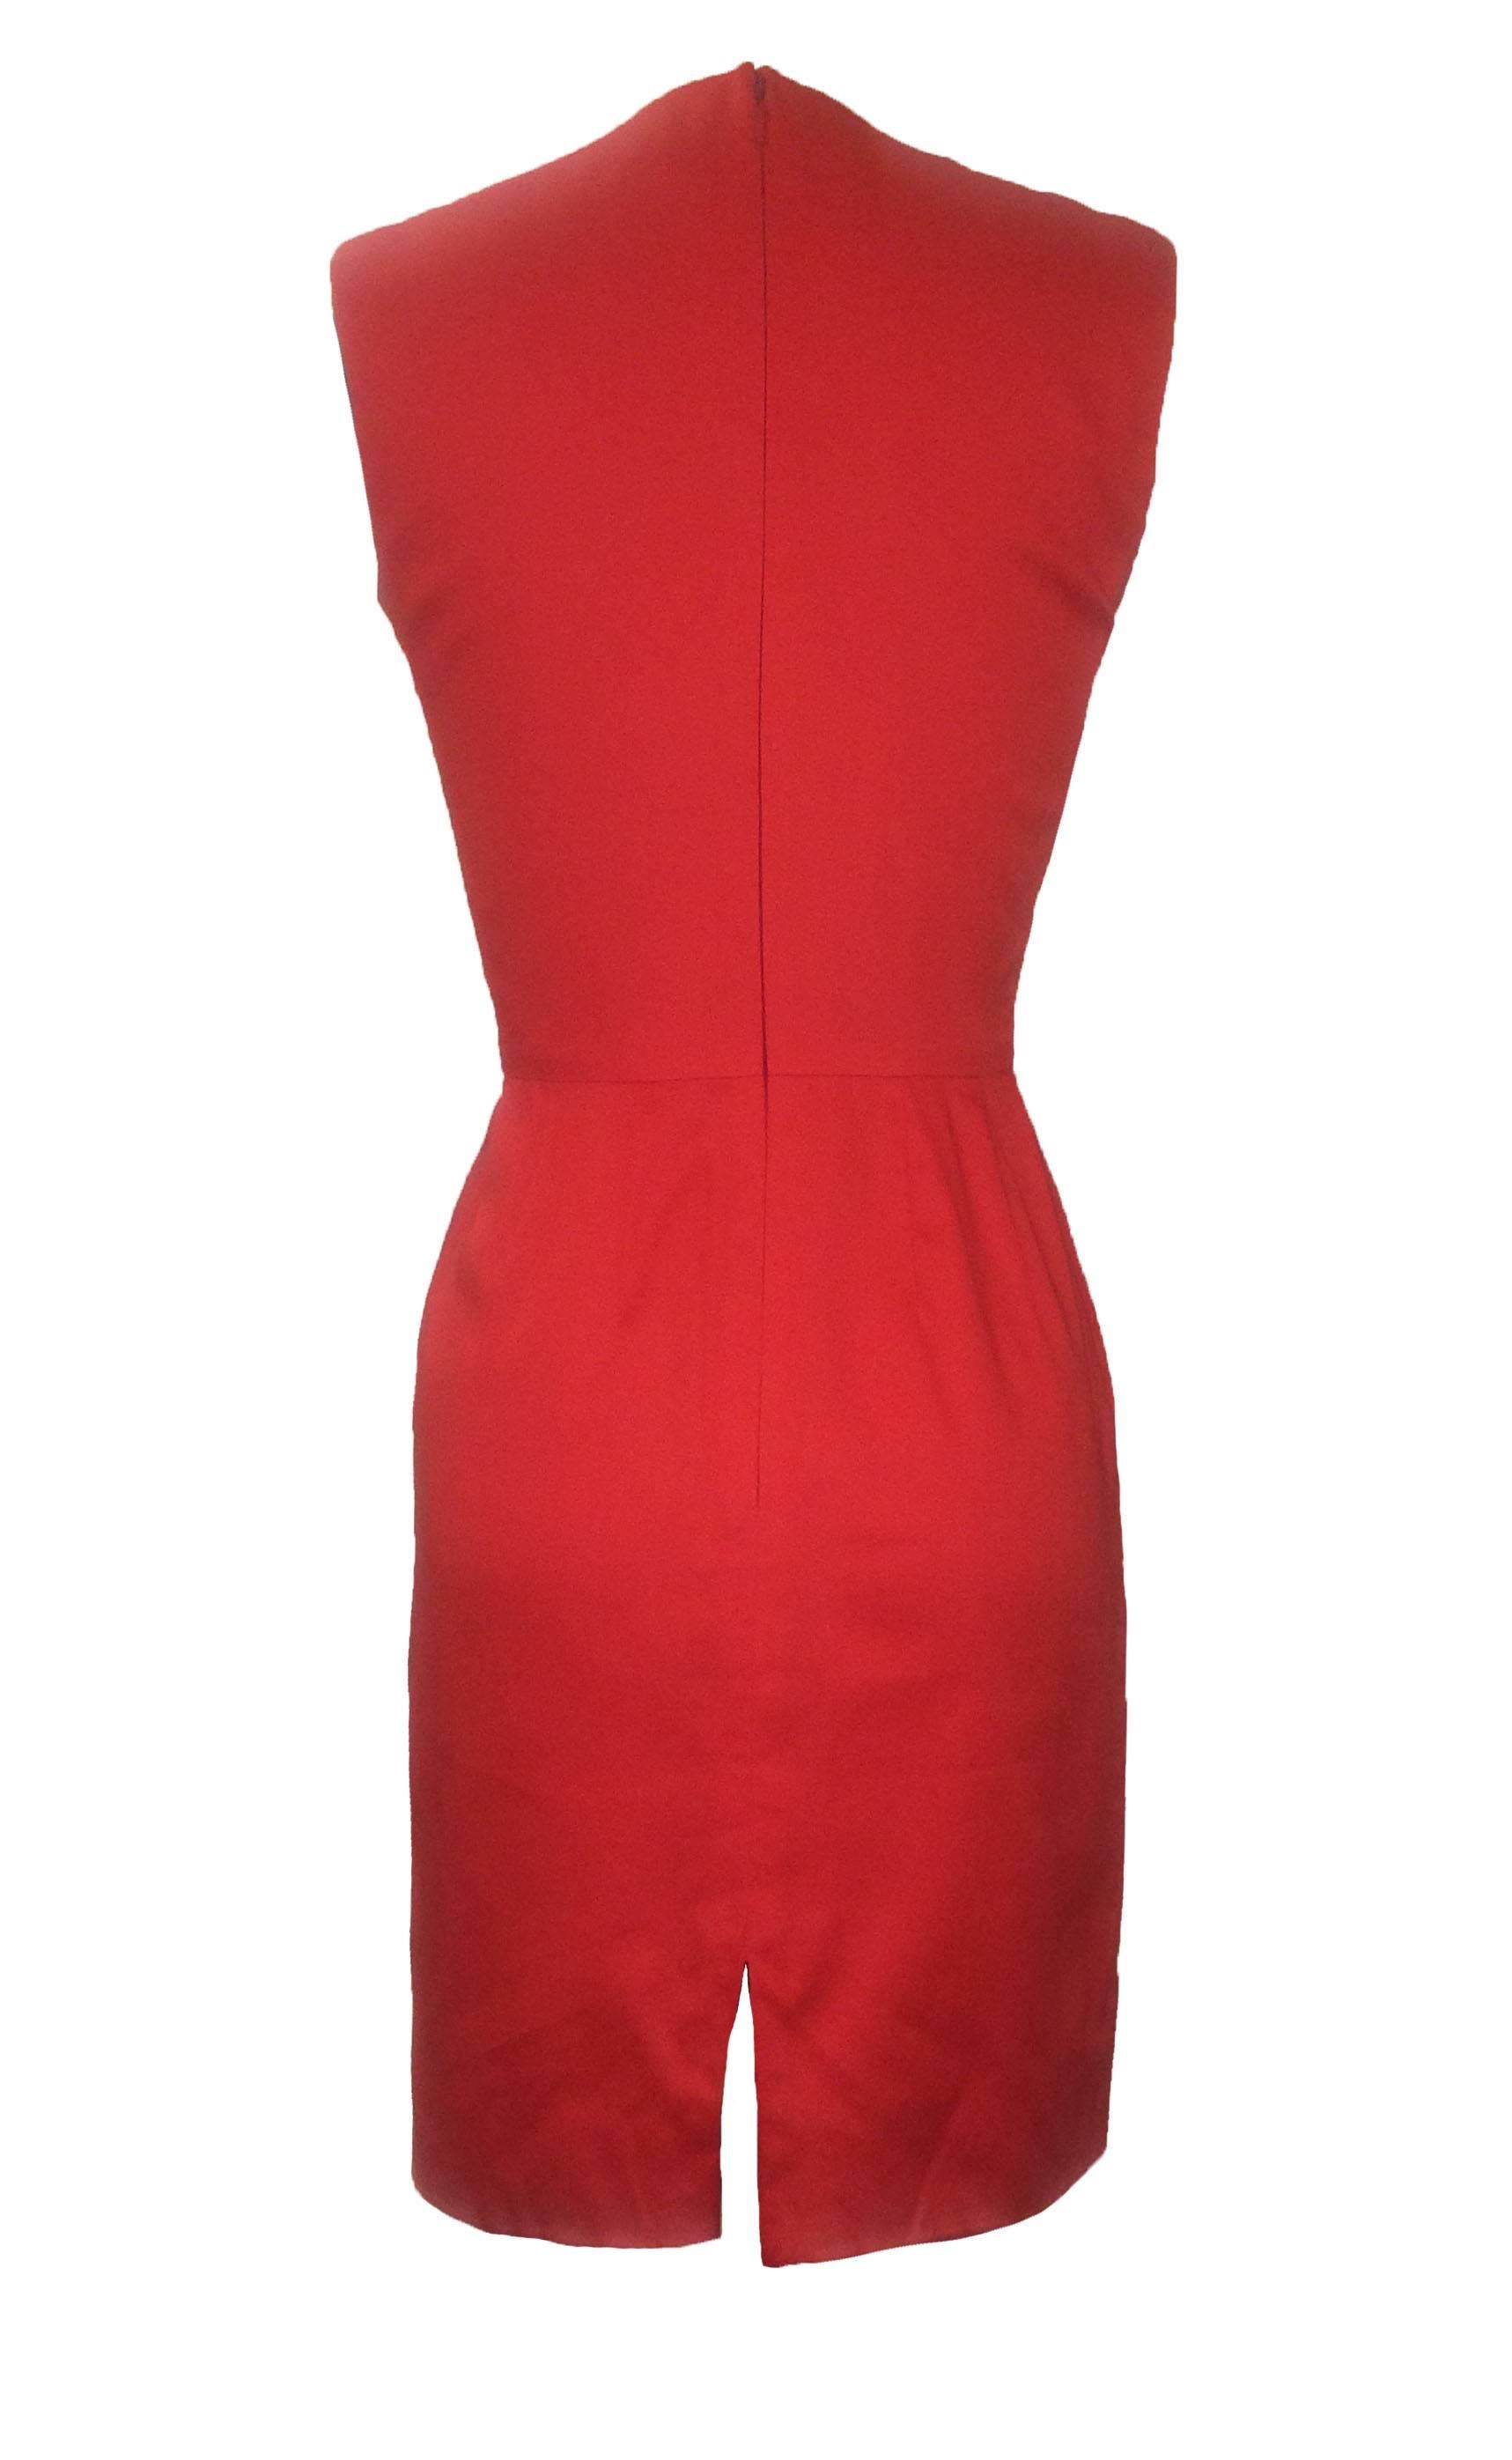 Stephen Sprouse 90s sleeveless pencil dress in tomato red. Back zip.

100% cotton.
Fully lined in 100% acetate.

Made in Korea.

Size 4, fits like 0/2. Slight bit of stretch.
Bust 33